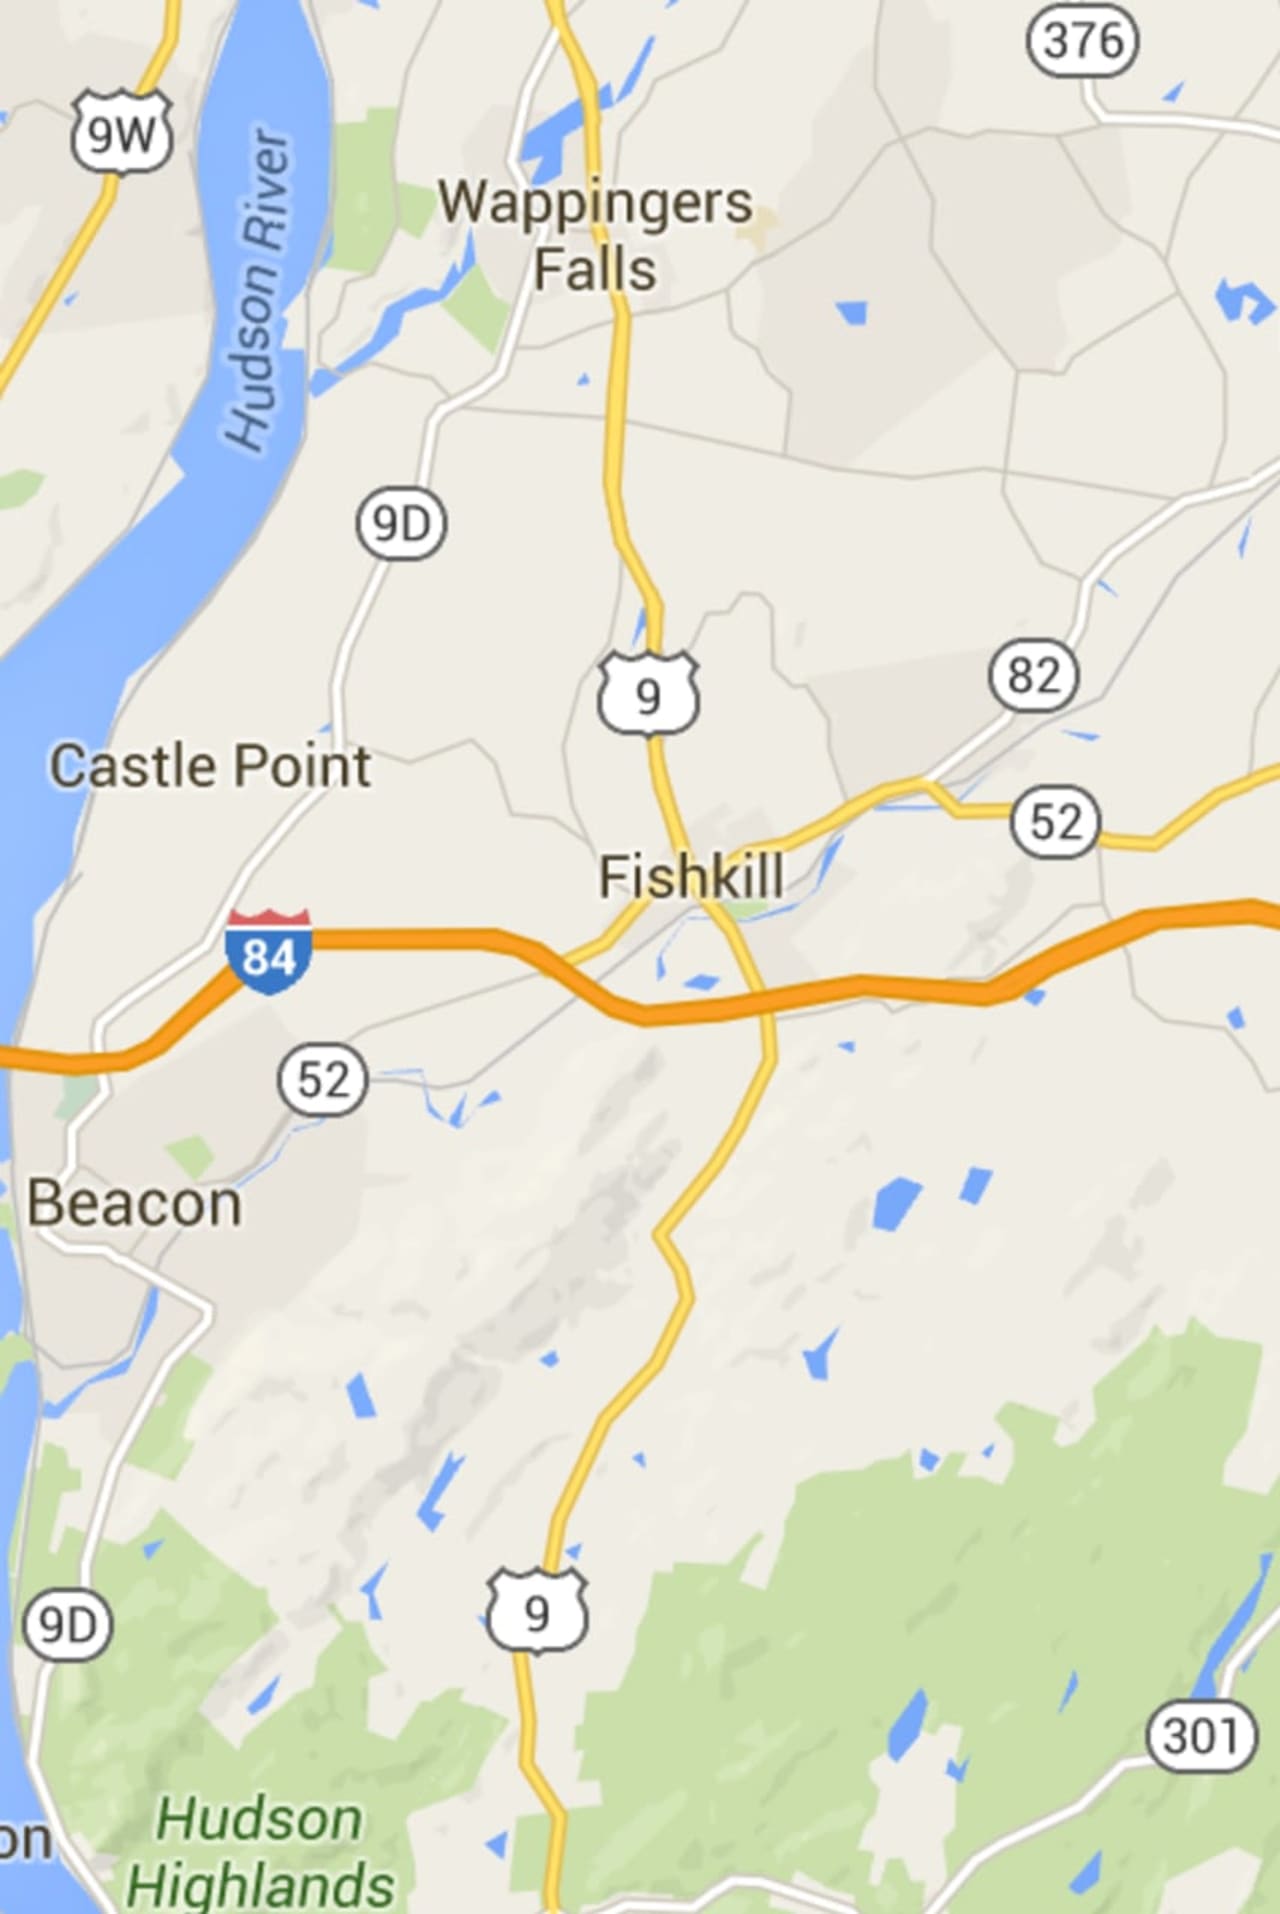 A tractor trailer rollover has closed I-84 westbound between Poughkeepsie and Beacon.